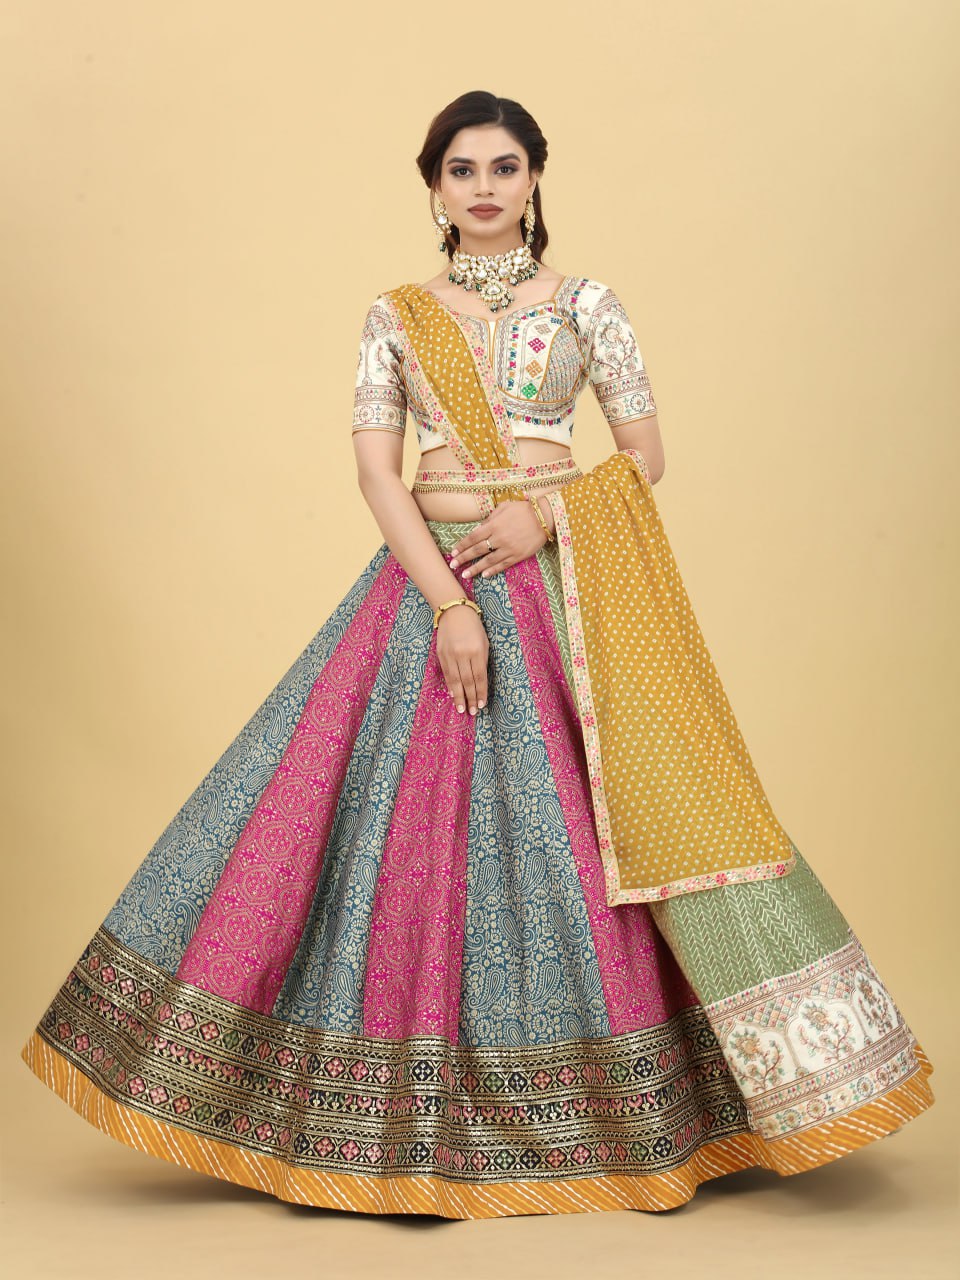 Designer Exclusive Cotton Lehenga Choli at Rs.1425/Piece in surat offer by  Fabliva